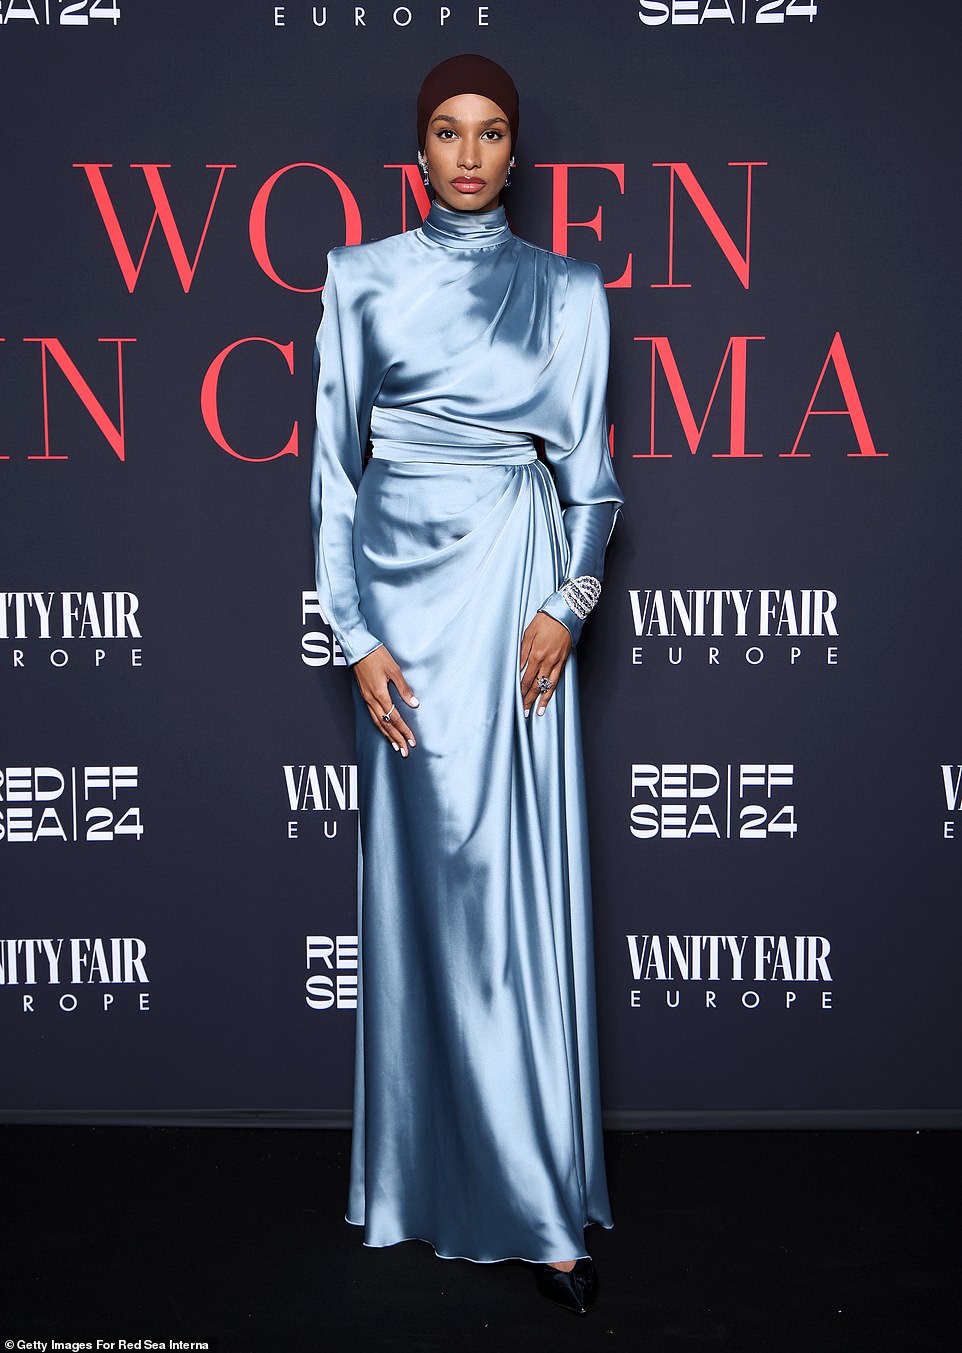 Ikram Abdi Omar looked ethereal in a baby blue, satin gown with long-sleeves and a mock neckline. The model sported black, pointed-toe shoes and rocked a chocolate brown hijab undercap as well as sparkling diamond jewelry